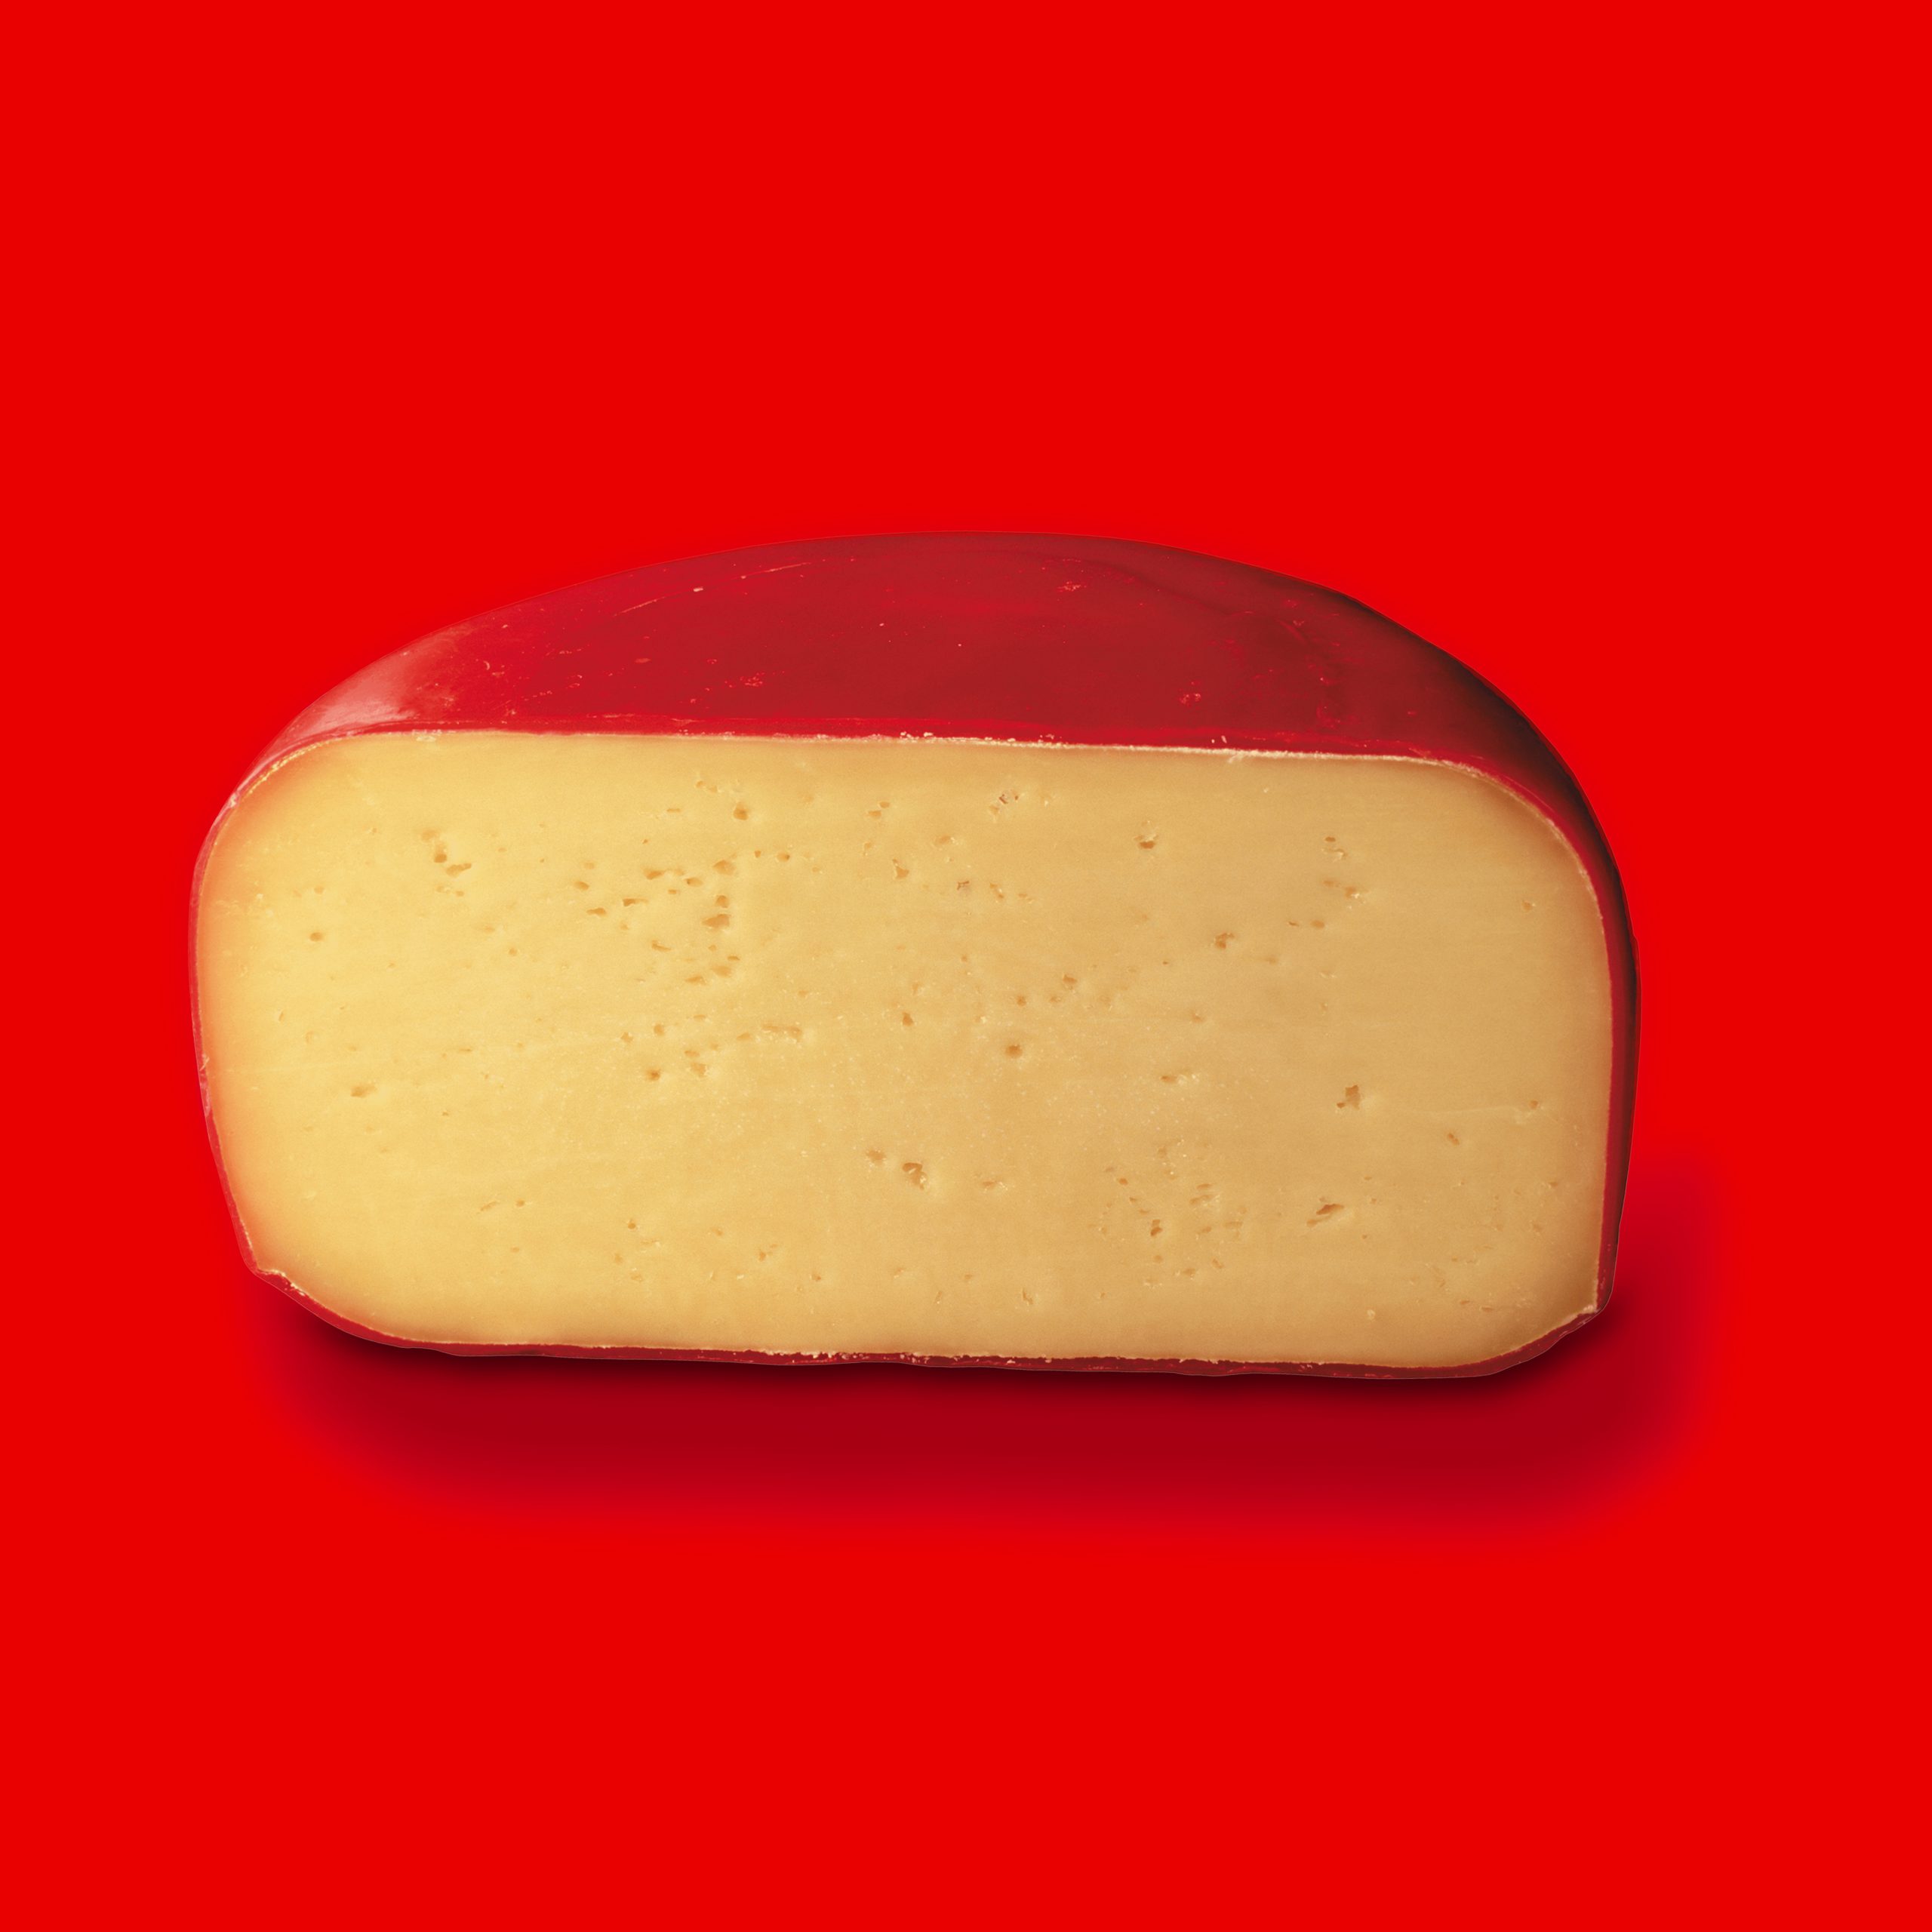 Half a wedge of cheese with red wax over red background